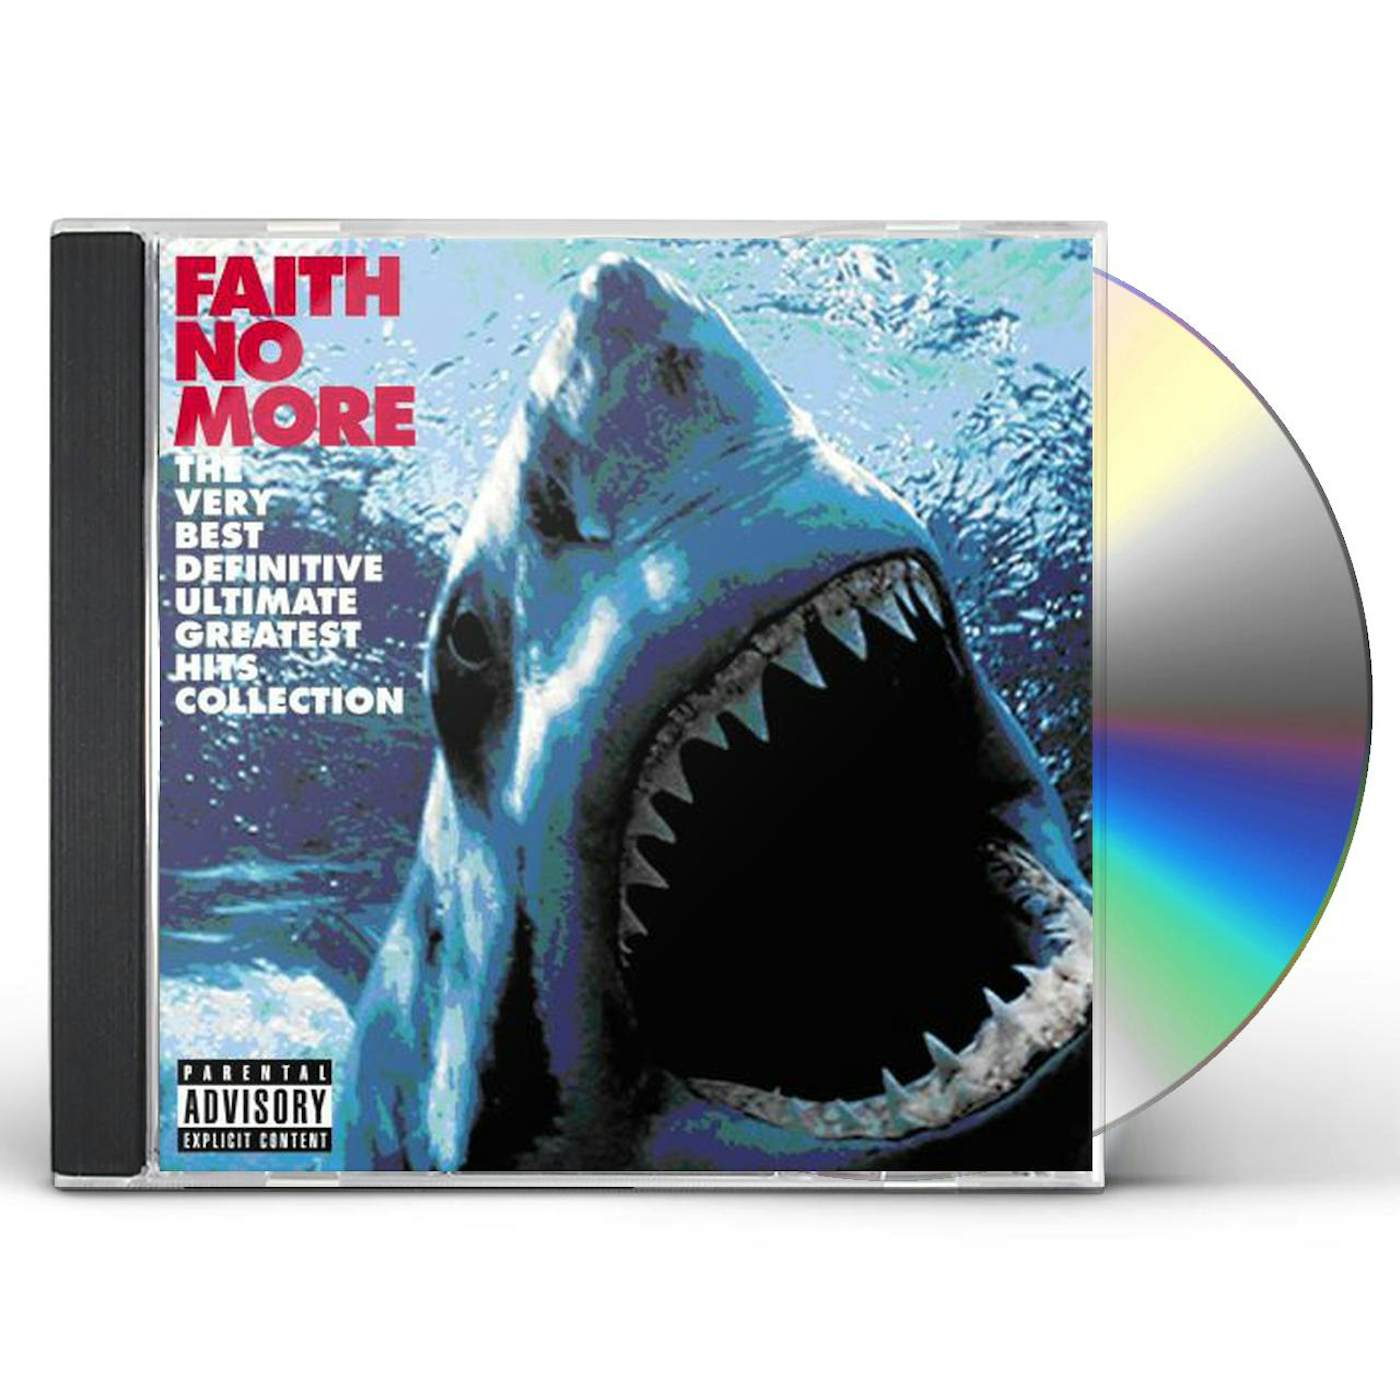 Faith No More VERY BEST DEFINITIVE ULTIMATE GREATEST HITS CD